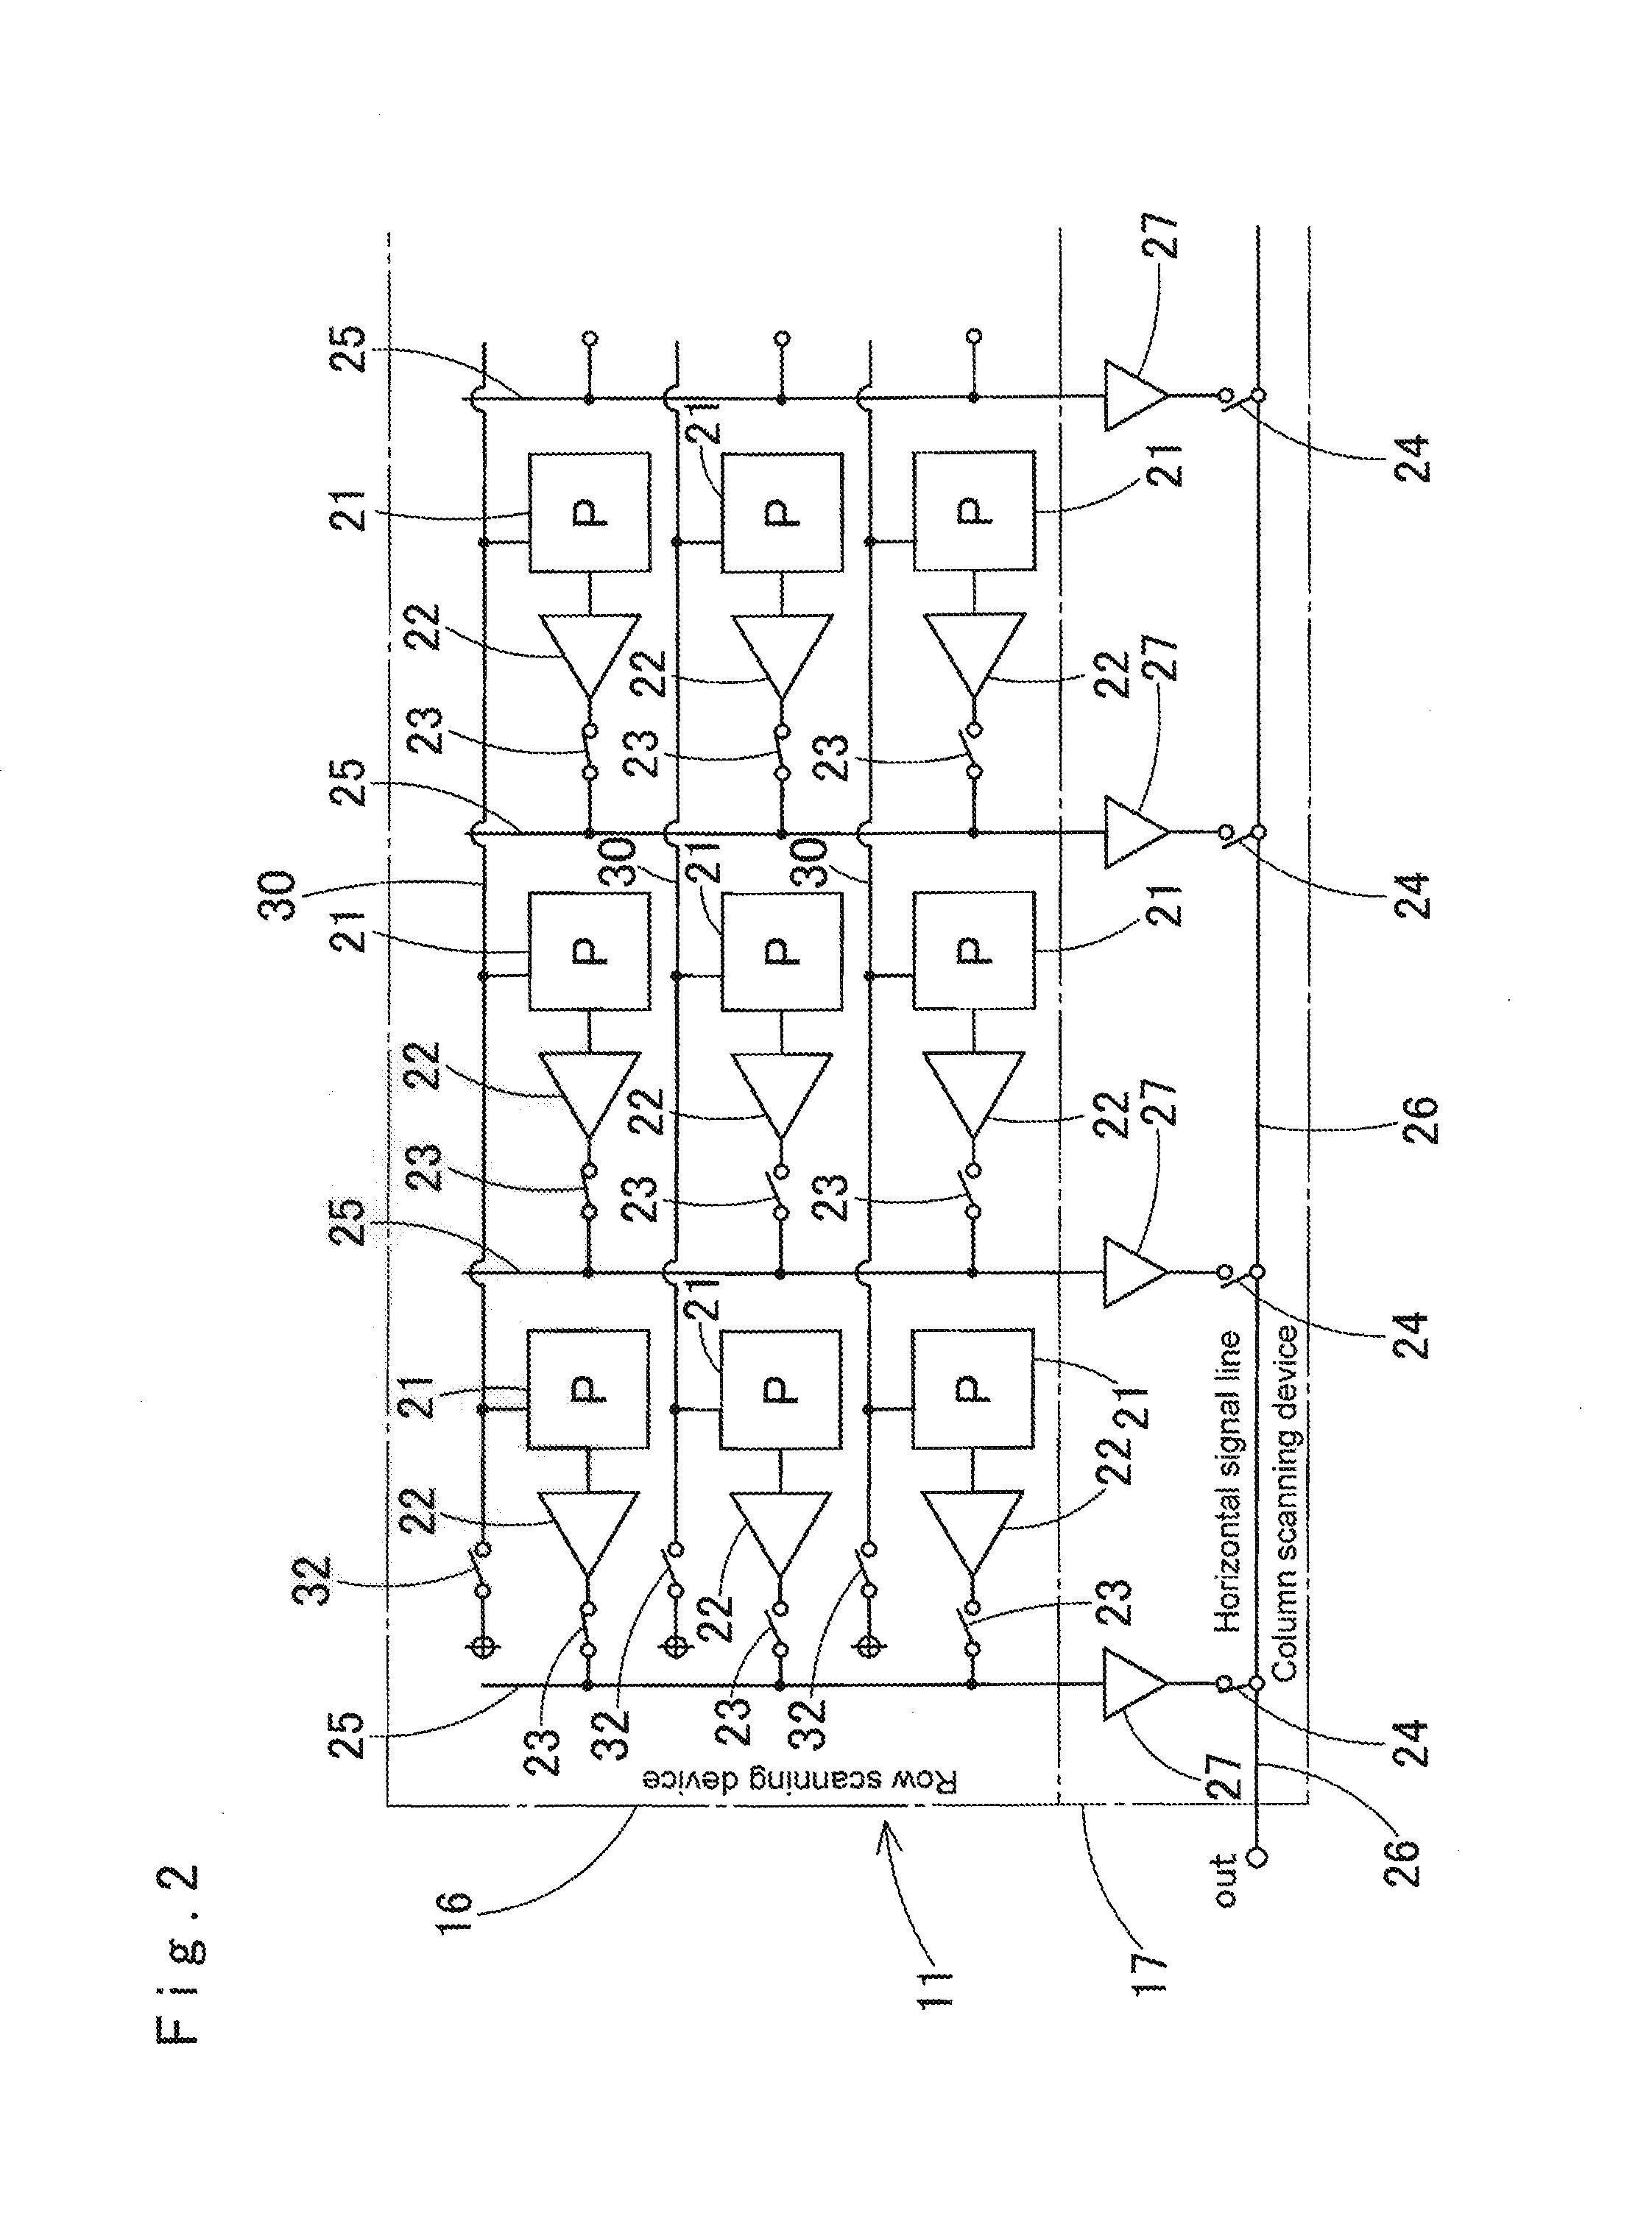 Visible light receiving method and apparatus using the same